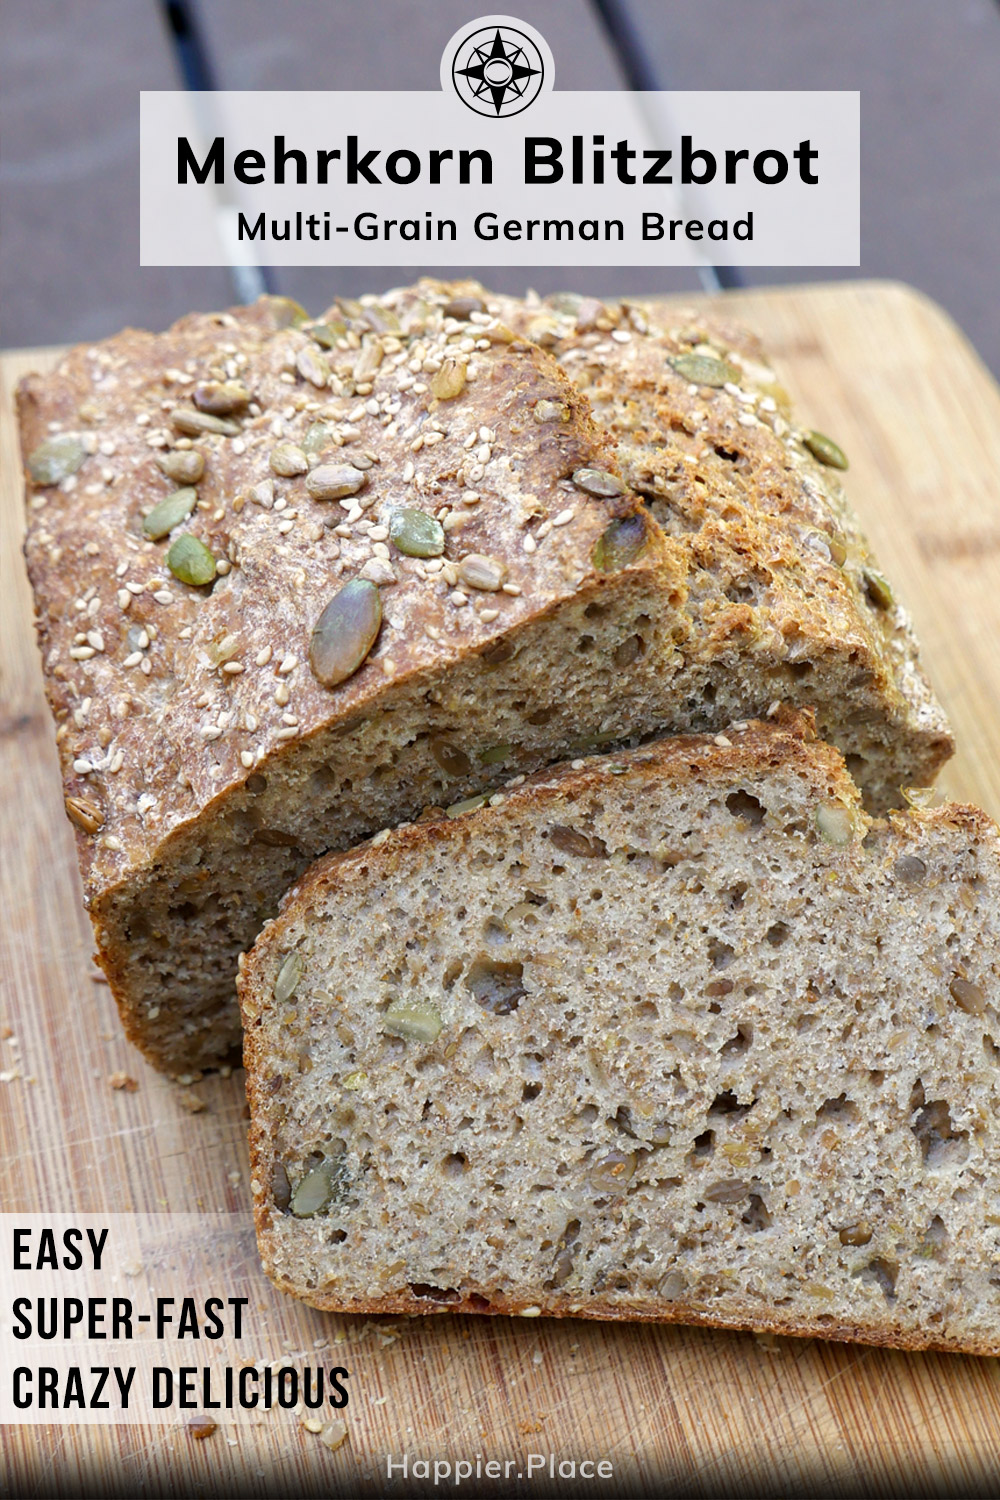 Bake at home Mehrkorn Blitzbrot, easy fast delicious multi-grain, multi-seed, wholewheat German bread from Happier Place